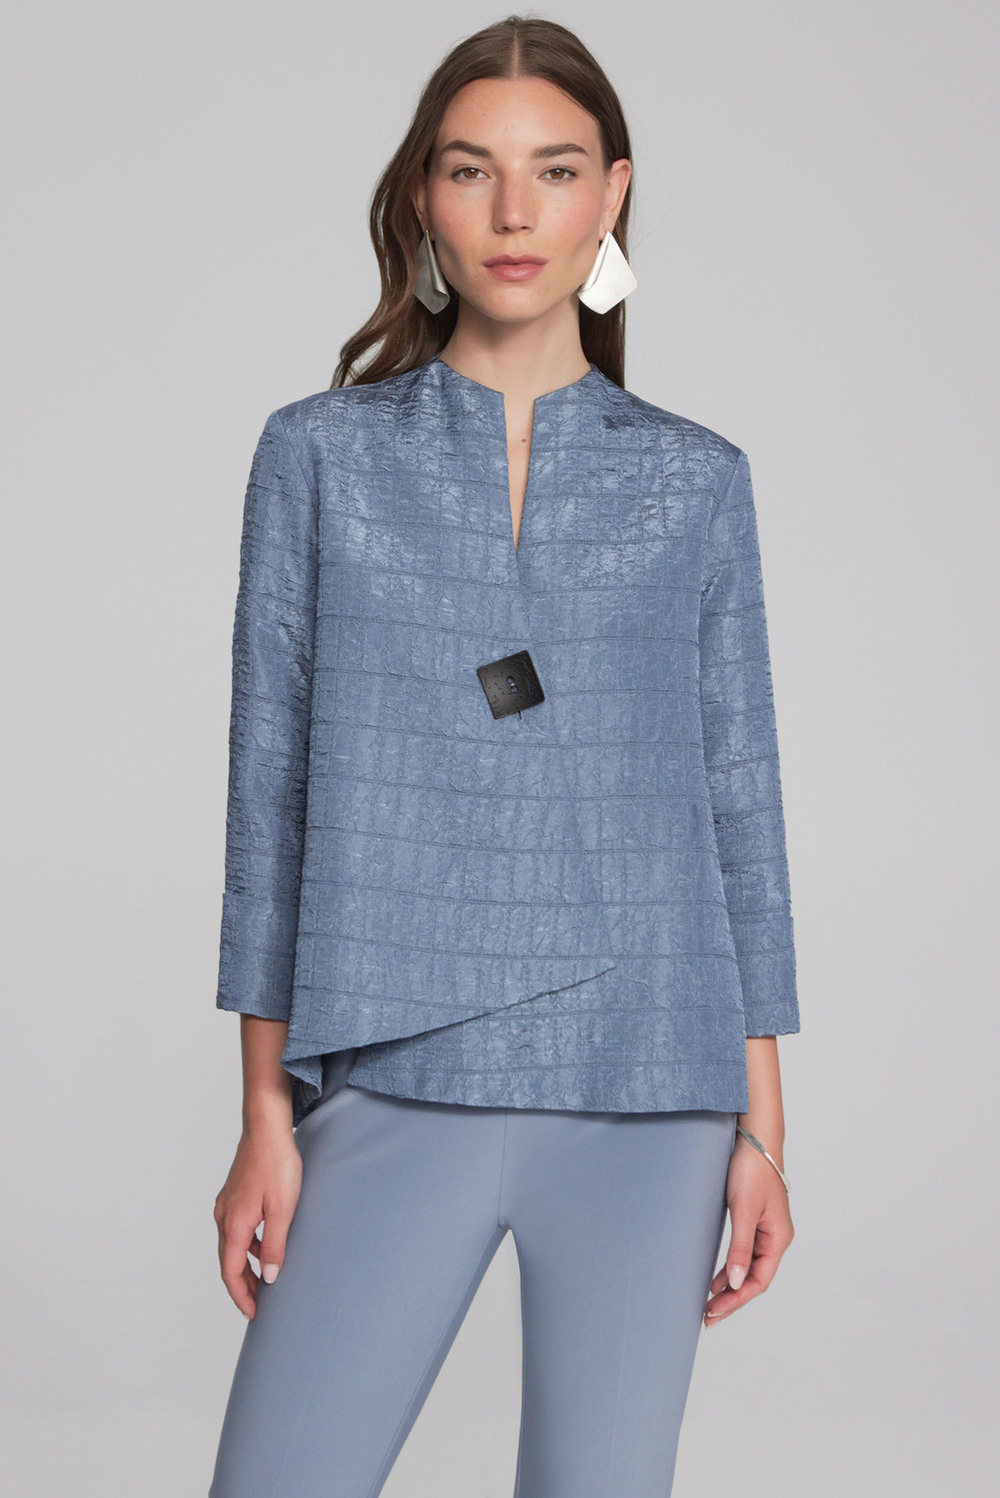 Quilted Cropped Blazer Style 233792. Serenity Blue